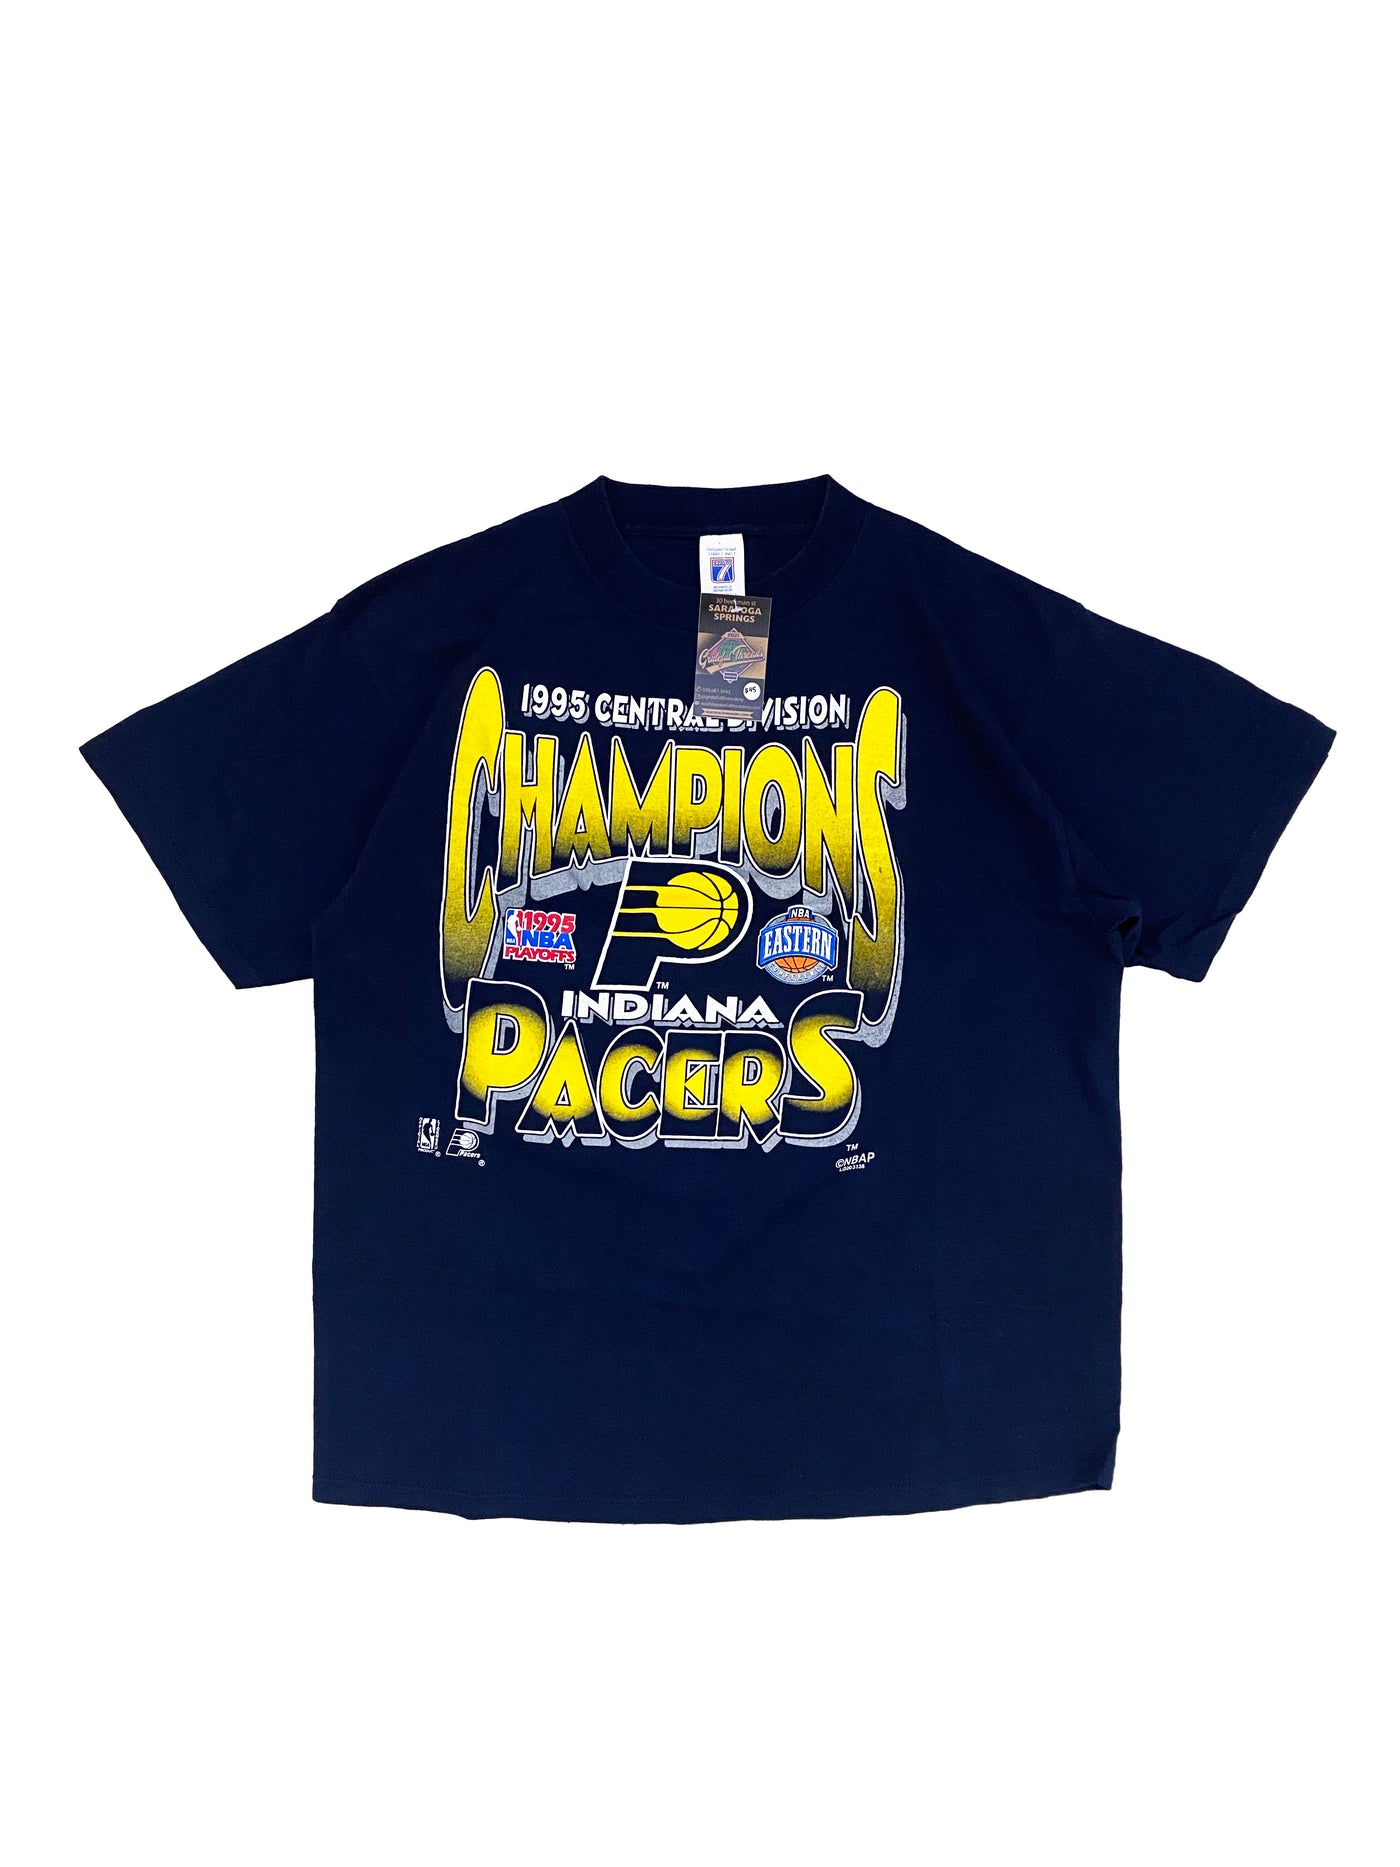 Vintage 1995 Indiana Pacers Champions T-Shirt